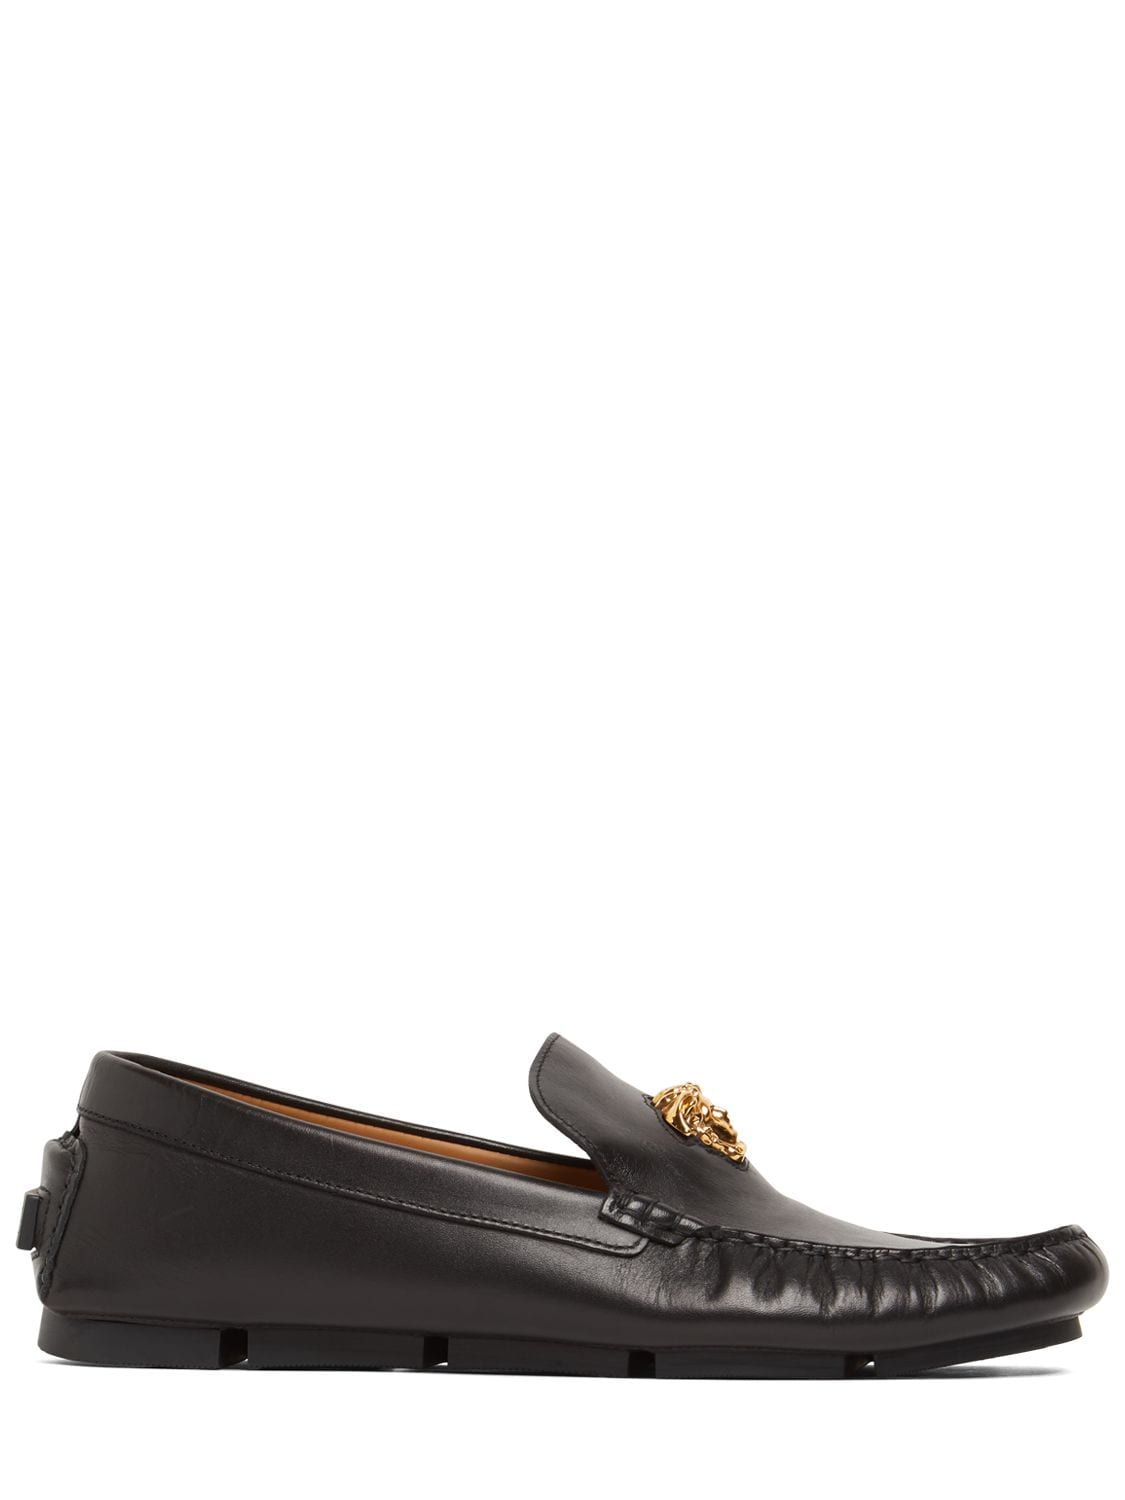 VERSACE Medusa Leather Driver Loafers